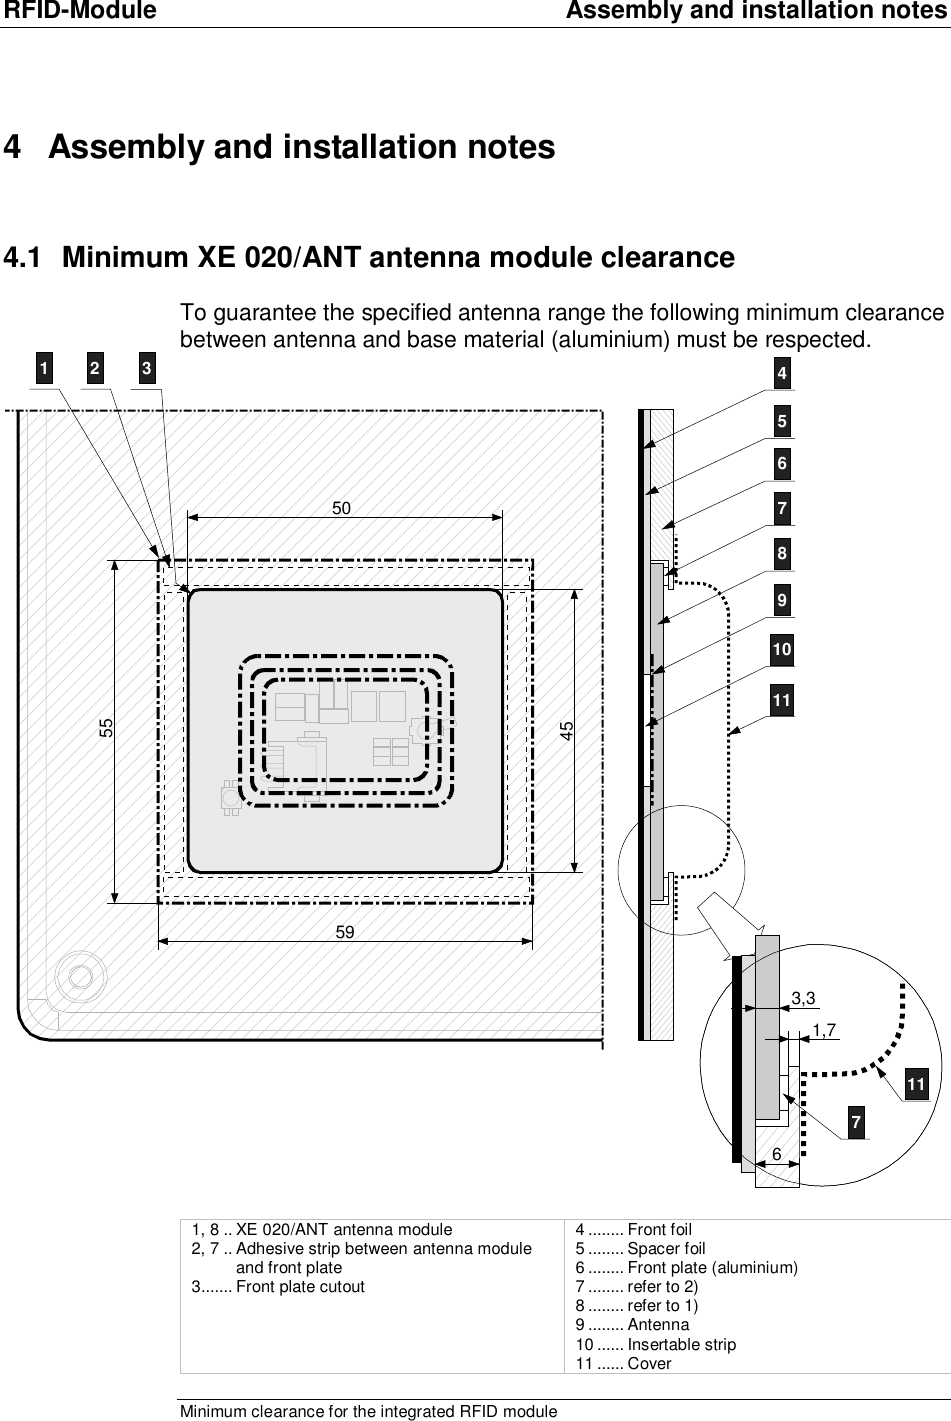 RFID-Module Assembly and installation notes 4 Assembly and installation notes 4.1 Minimum XE 020/ANT antenna module clearance To guarantee the specified antenna range the following minimum clearance between antenna and base material (aluminium) must be respected. 50456789104559551121 3 45678910111,763,3711711  1, 8..XE 020/ANT antenna module 2, 7..Adhesive strip between antenna module and front plate 3.......Front plate cutout  4........Front foil 5........Spacer foil 6........Front plate (aluminium) 7........refer to 2) 8........refer to 1) 9........Antenna 10......Insertable strip 11......Cover Minimum clearance for the integrated RFID module 